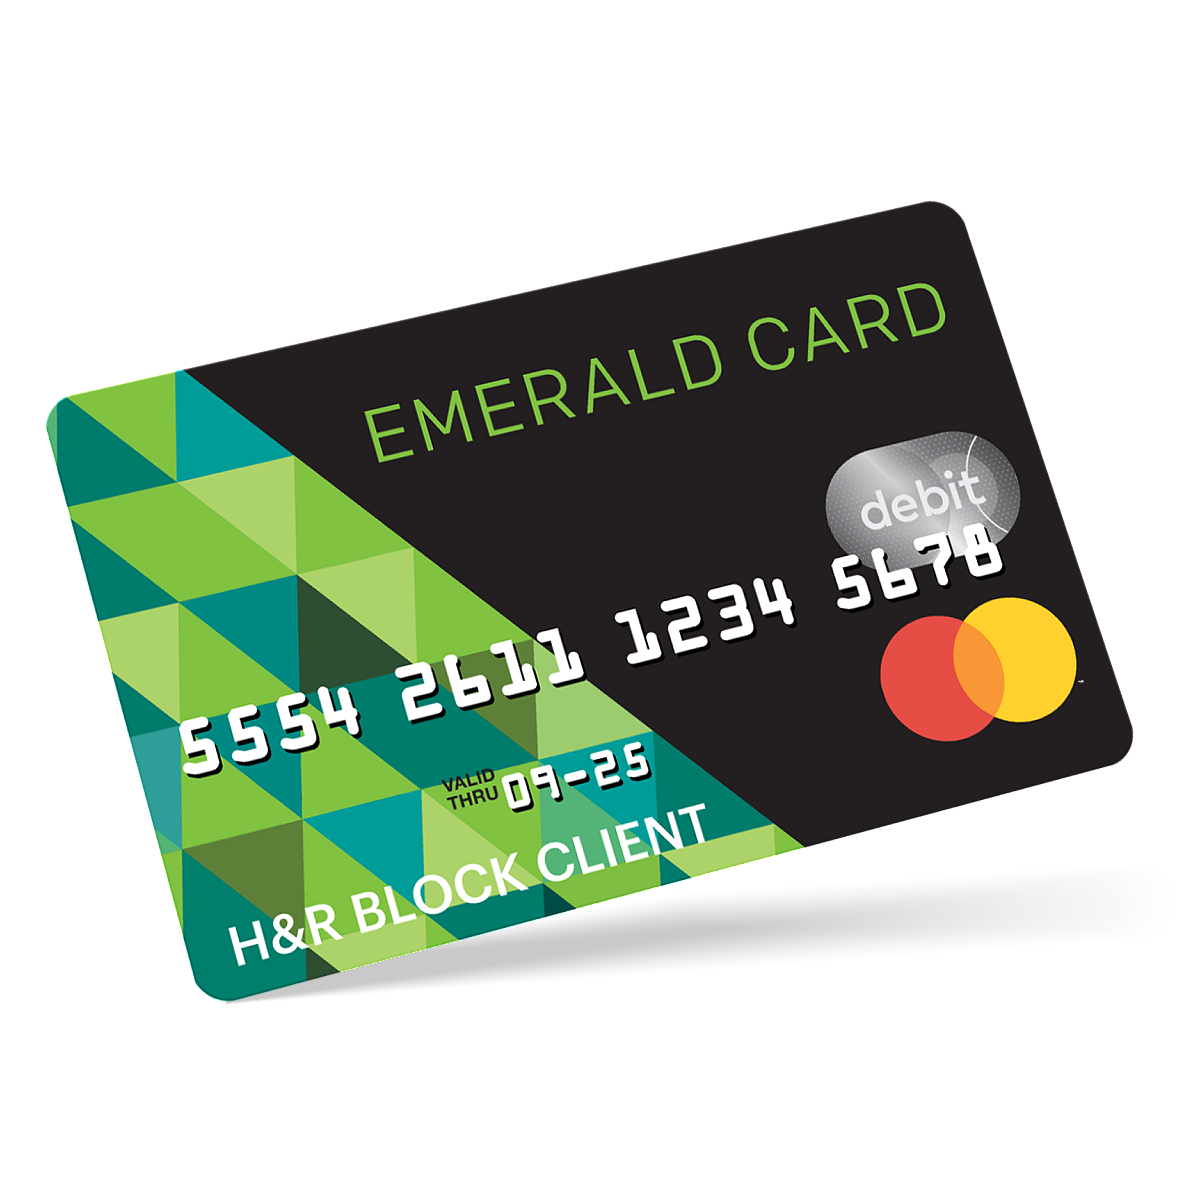 How To Activate My Emerald Card